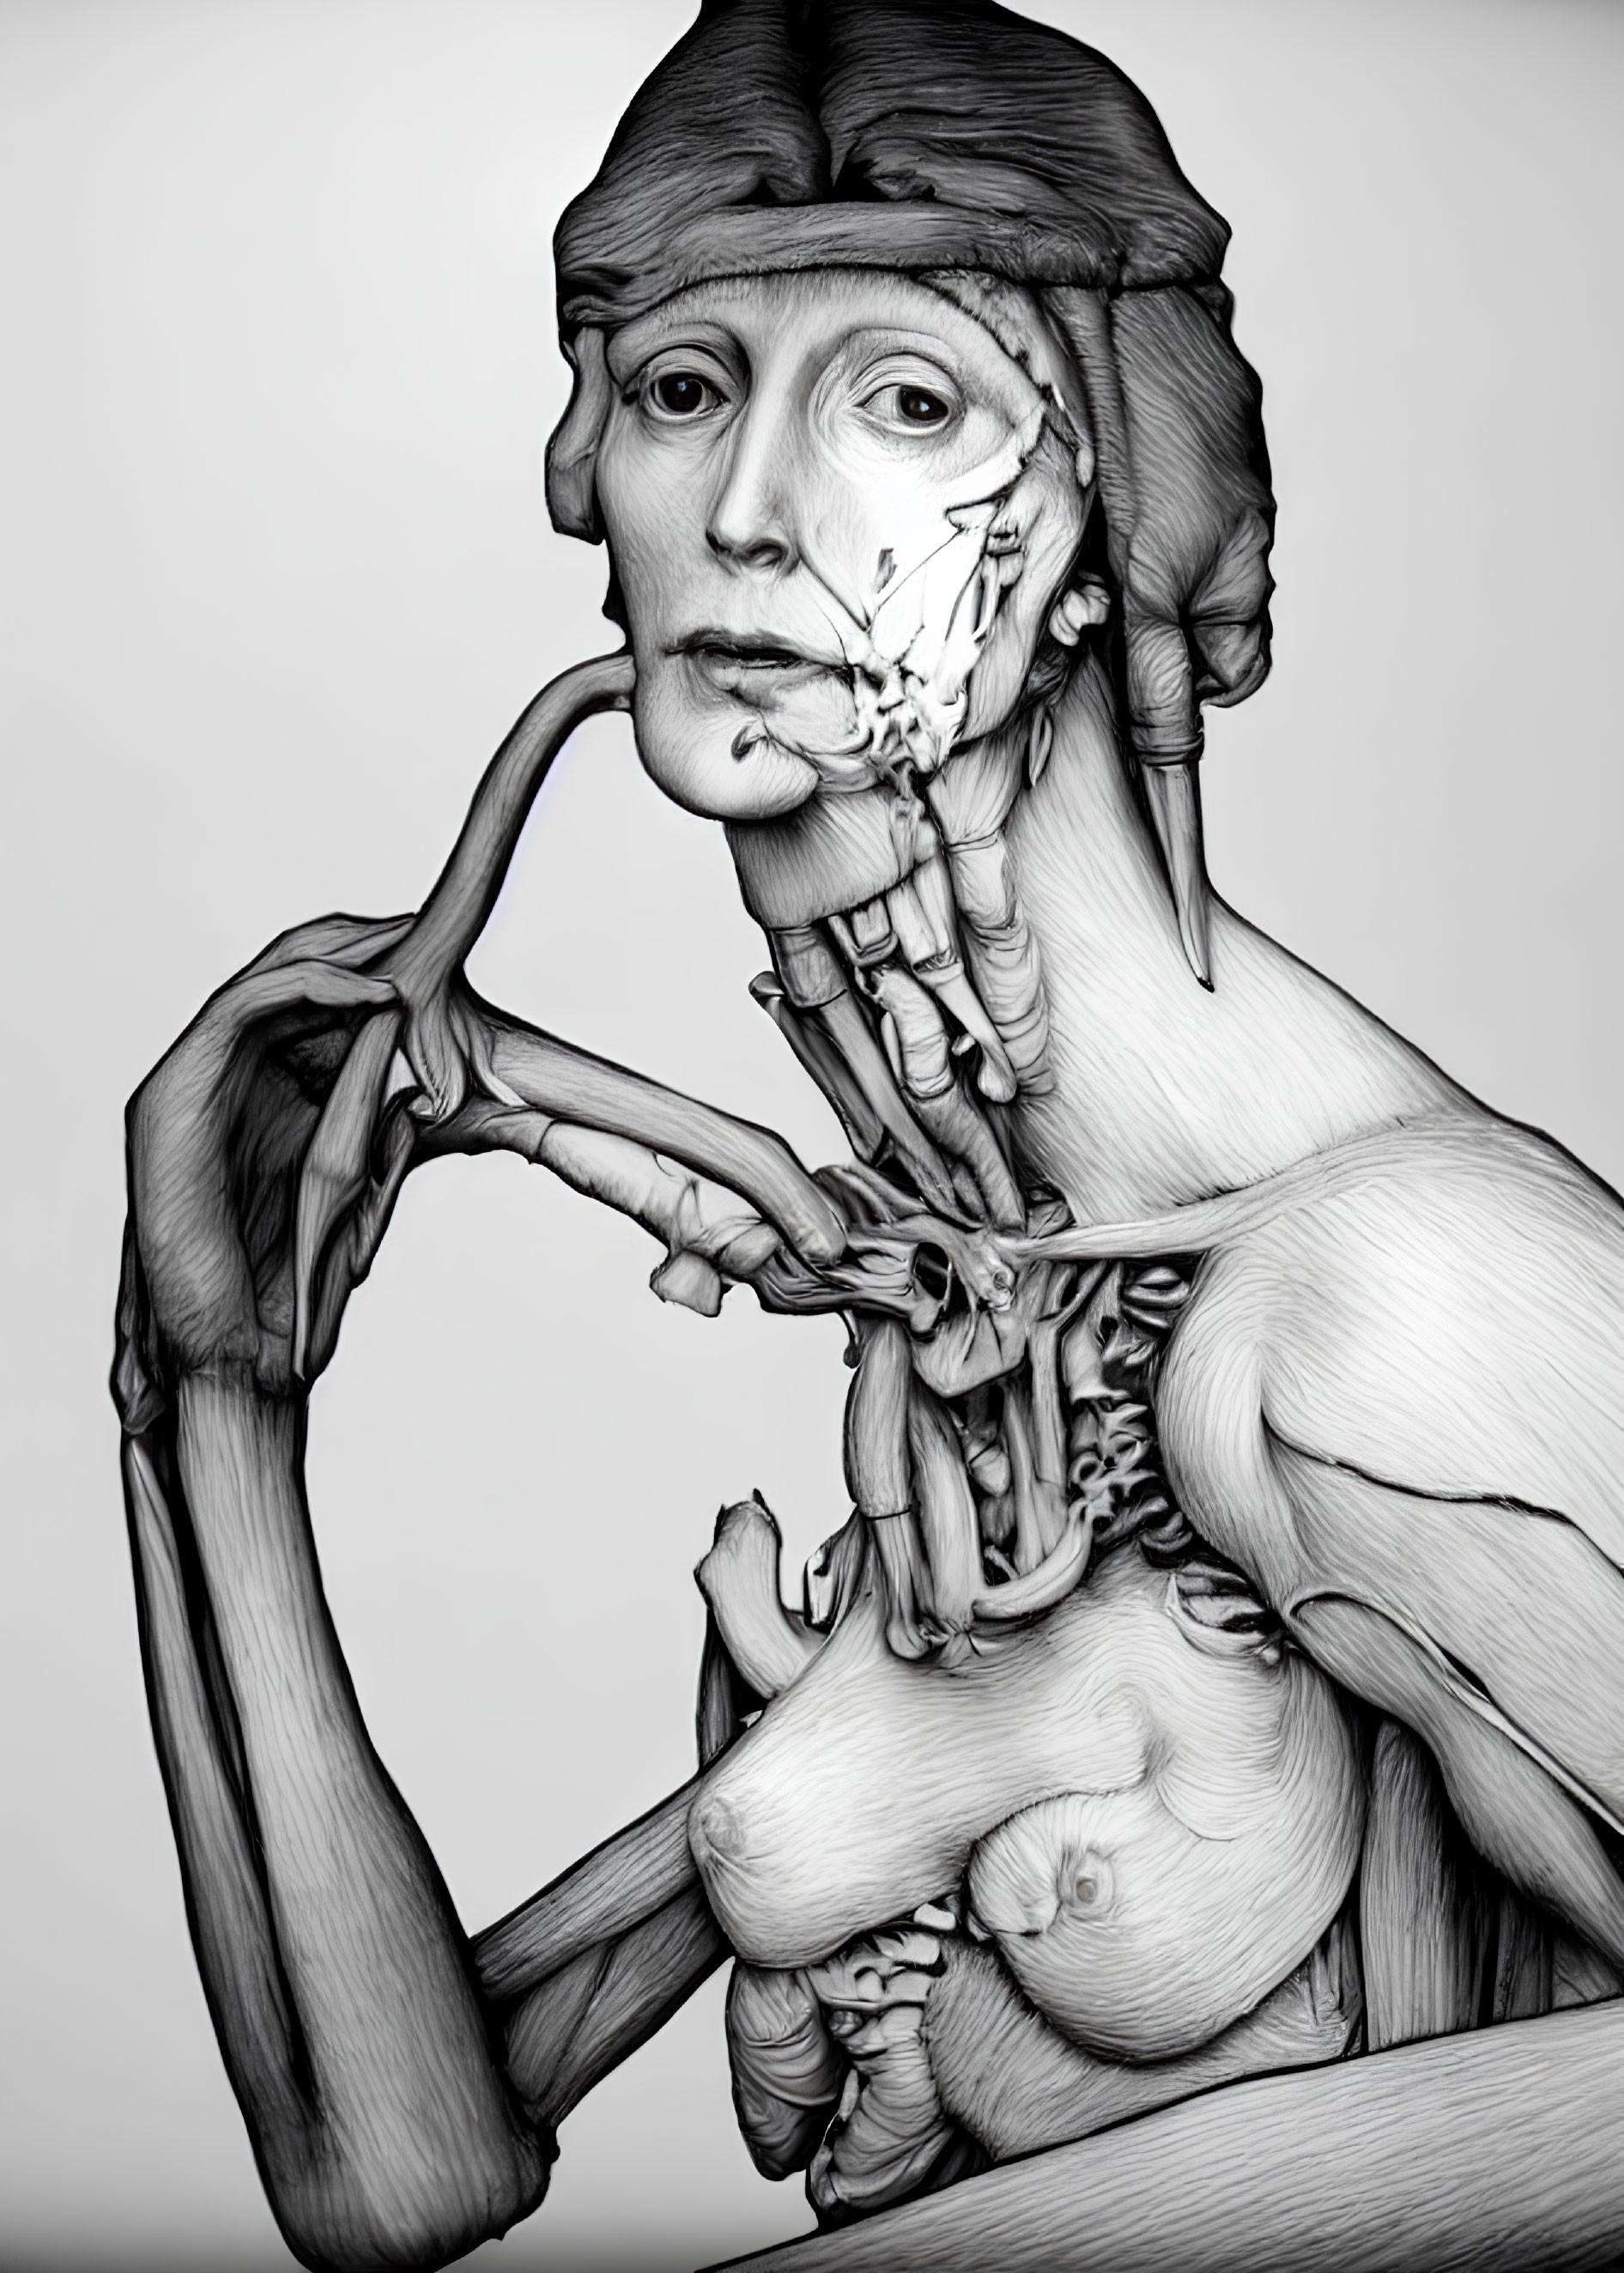 Digital artwork: Human figure with anatomical details blending muscles and skeleton on half-exposed face and body